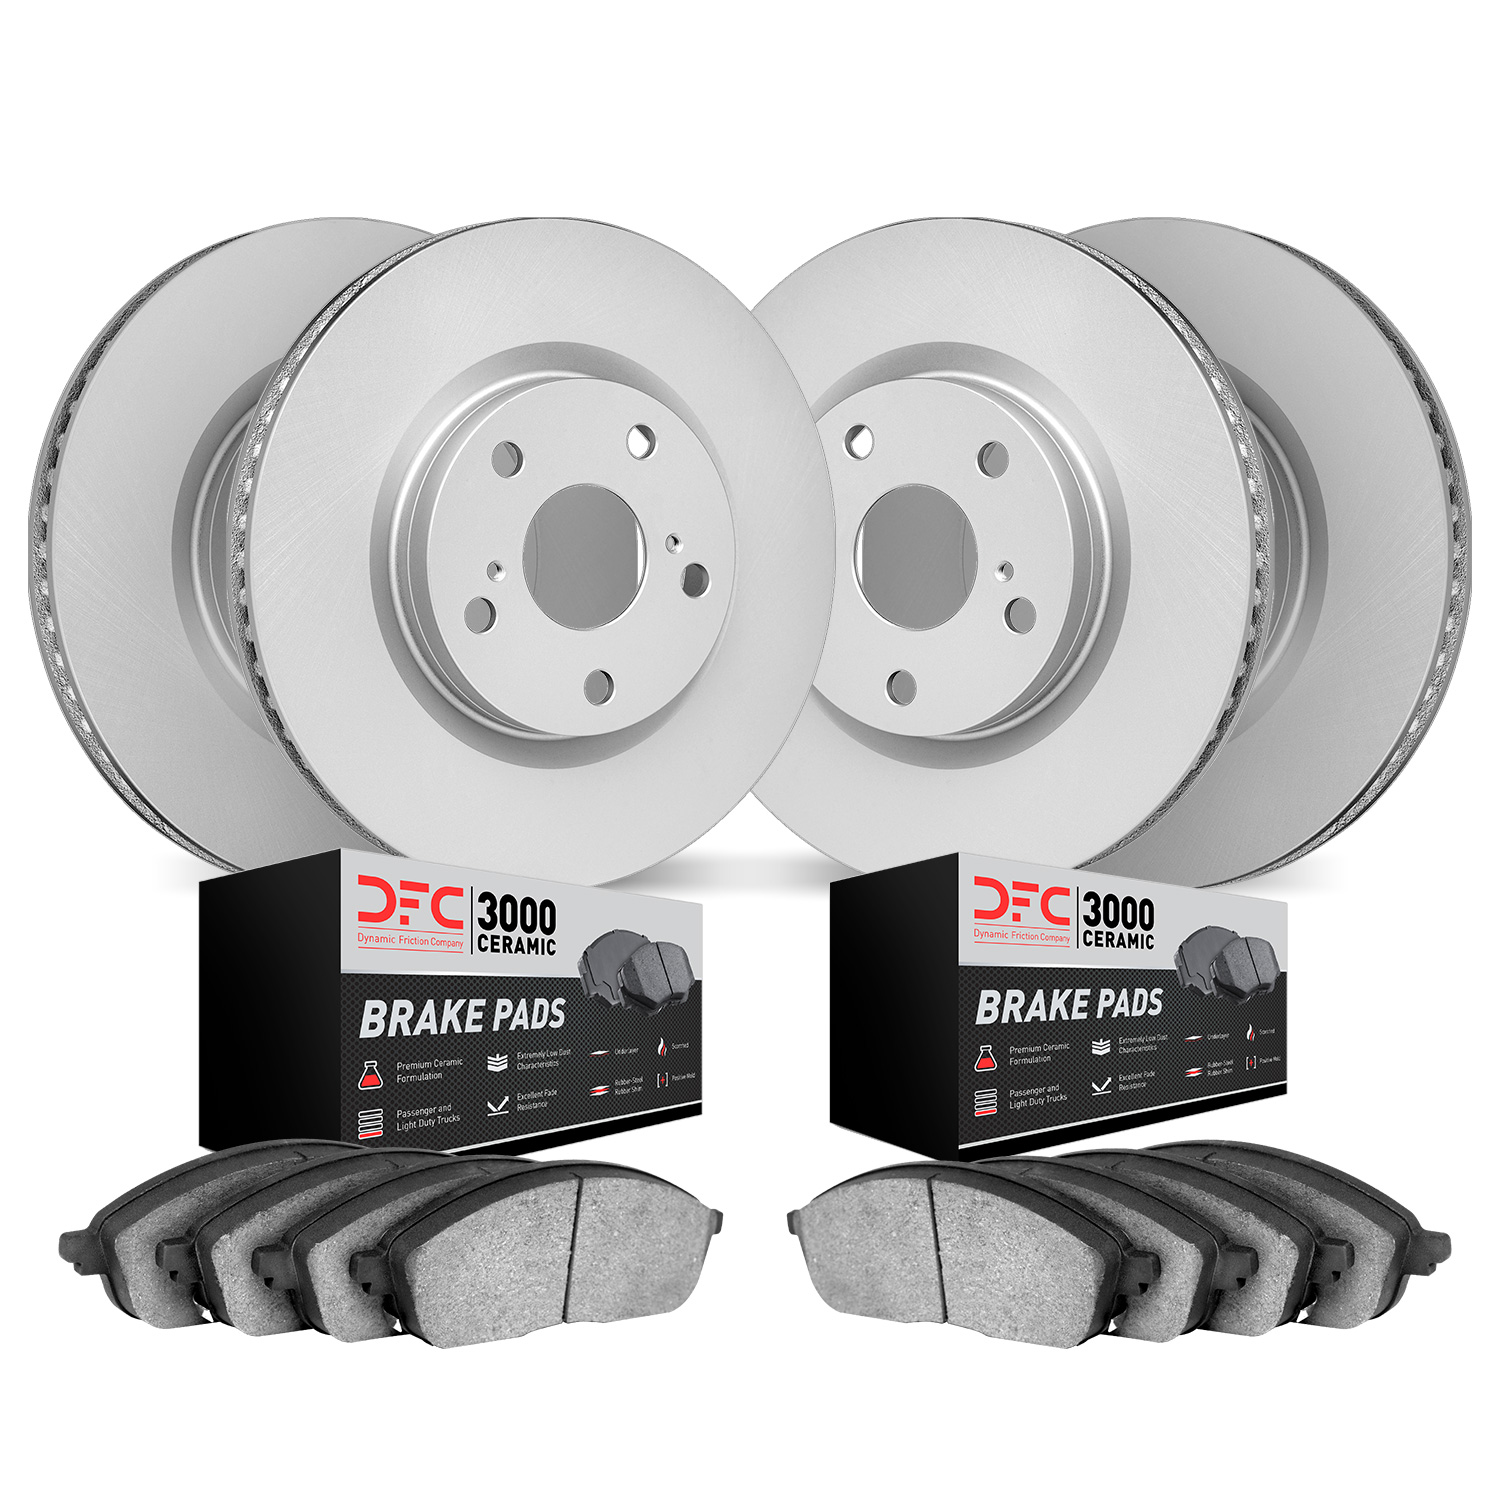 4304-67048 Geospec Brake Rotors with 3000-Series Ceramic Brake Pads Kit, Fits Select Infiniti/Nissan, Position: Front and Rear